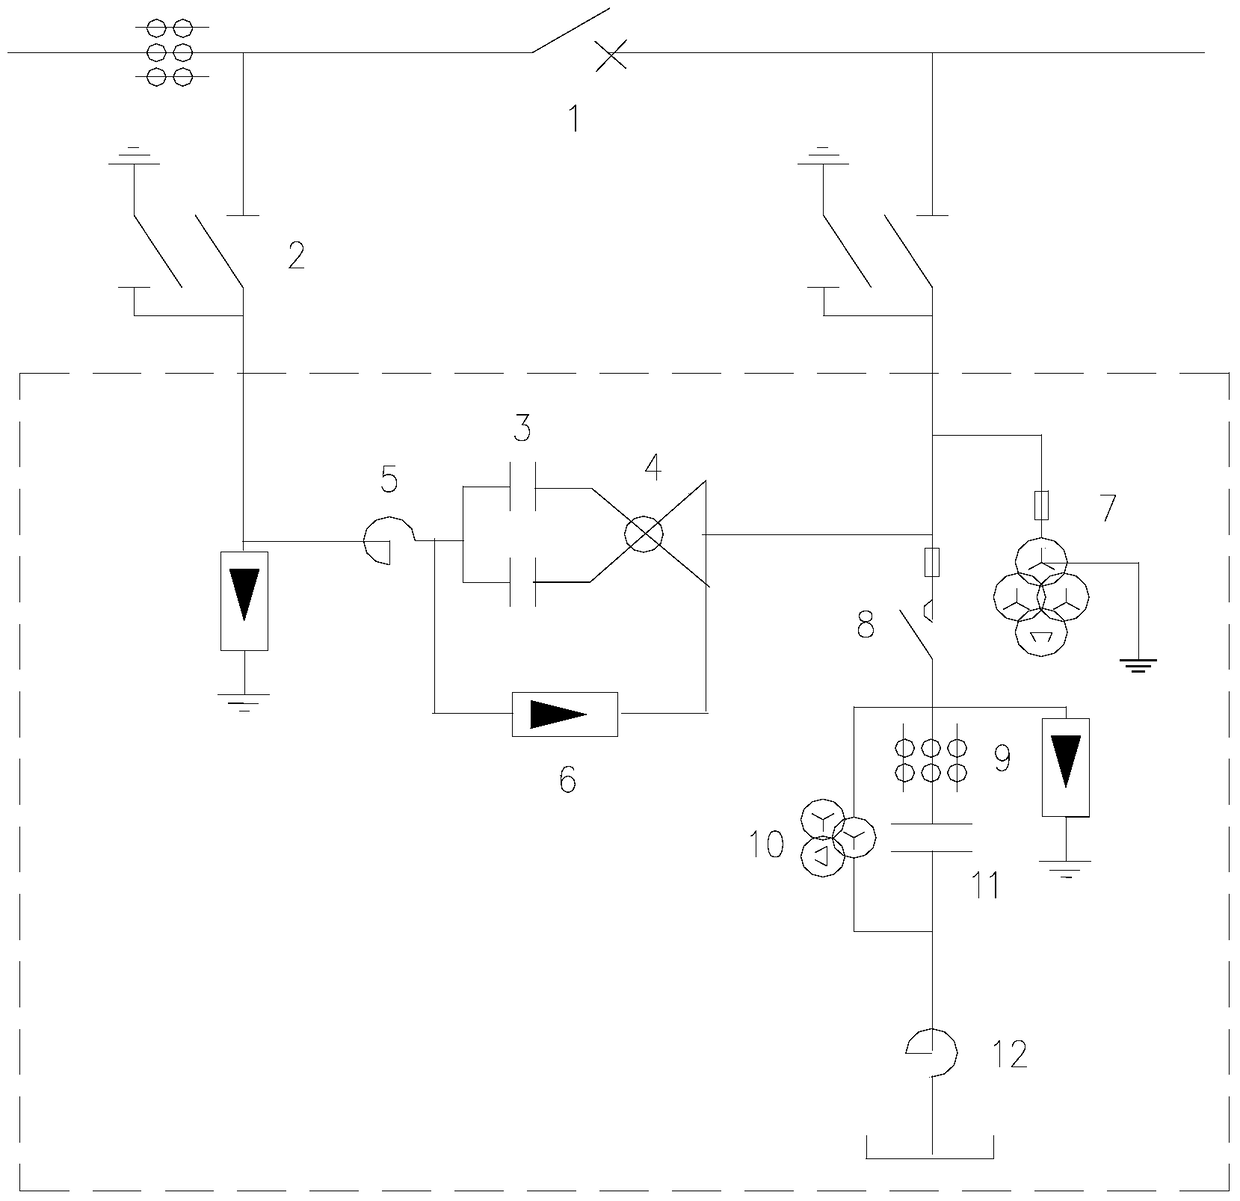 A series-parallel comprehensive compensation device for low-voltage control of distribution network